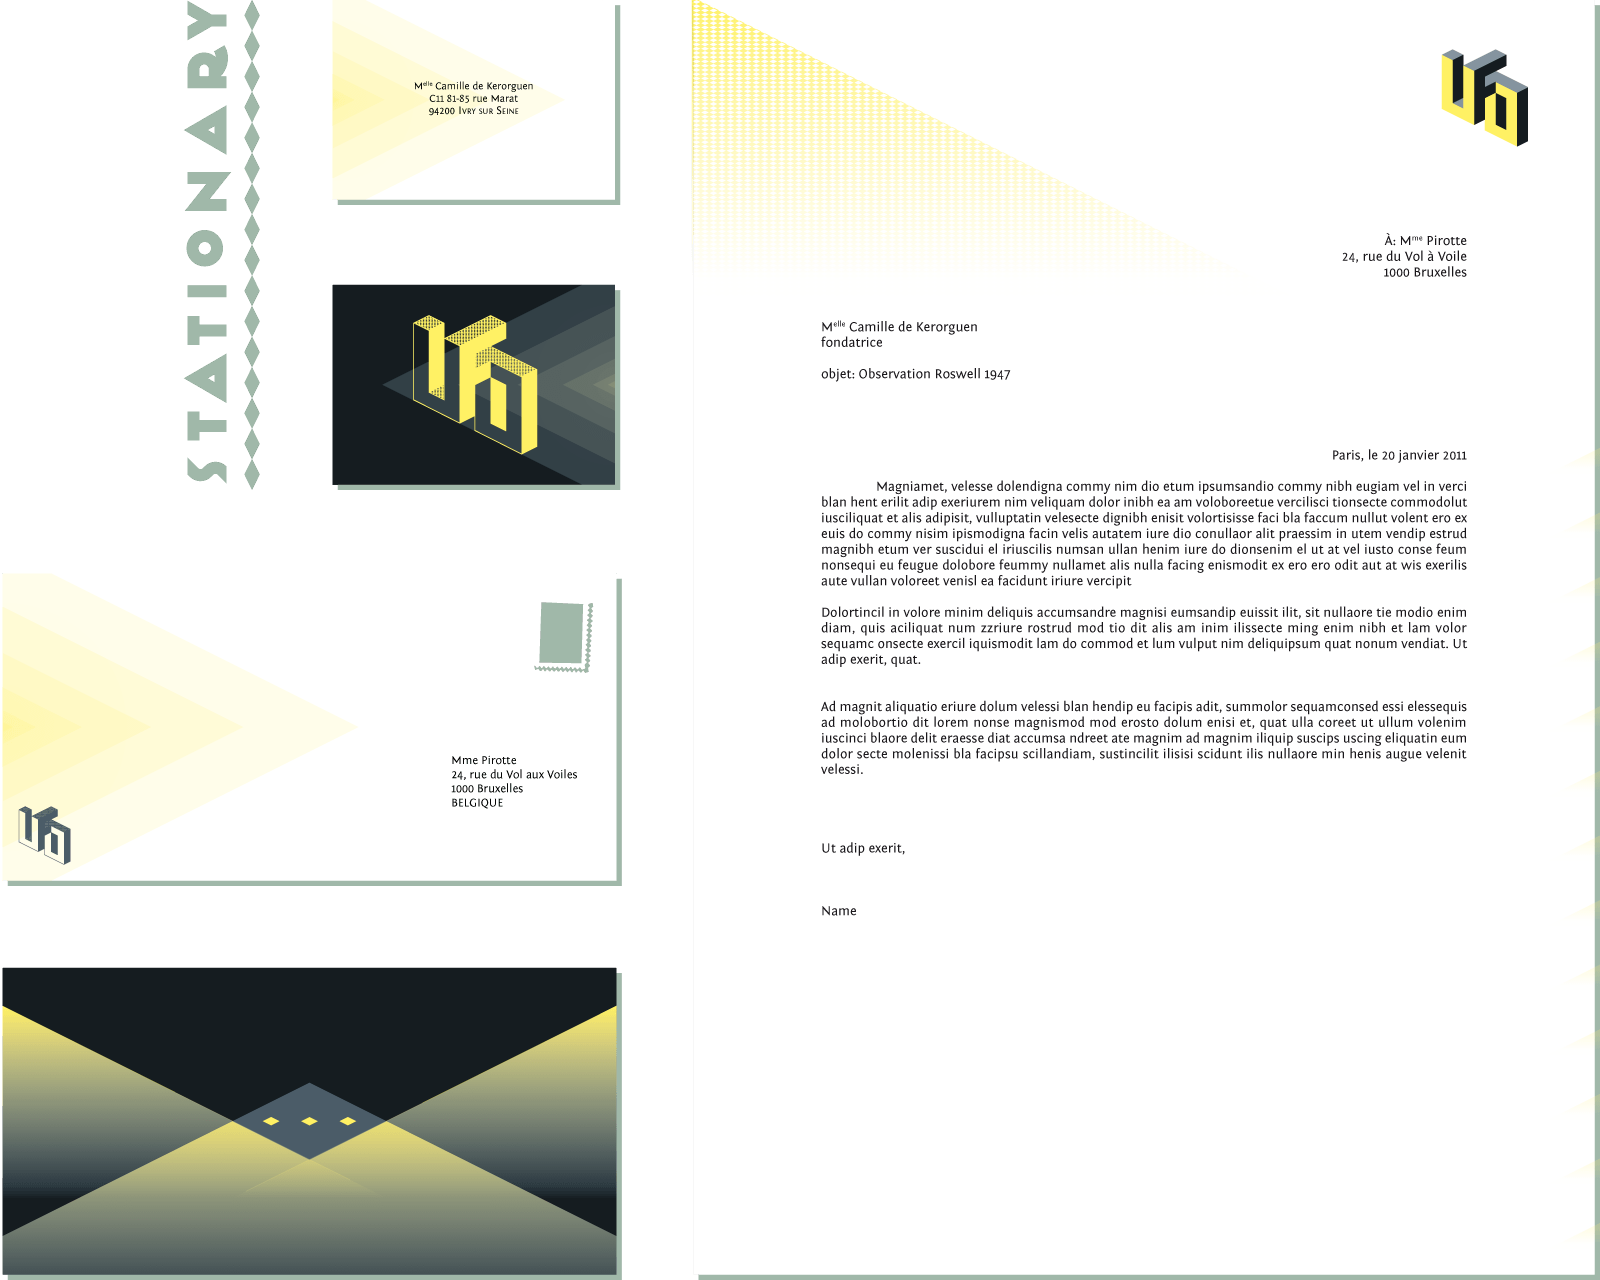 Stationary for a school assignement to create the whole visual identity for a fictive worker in the career field of our choice, here an ufologist.